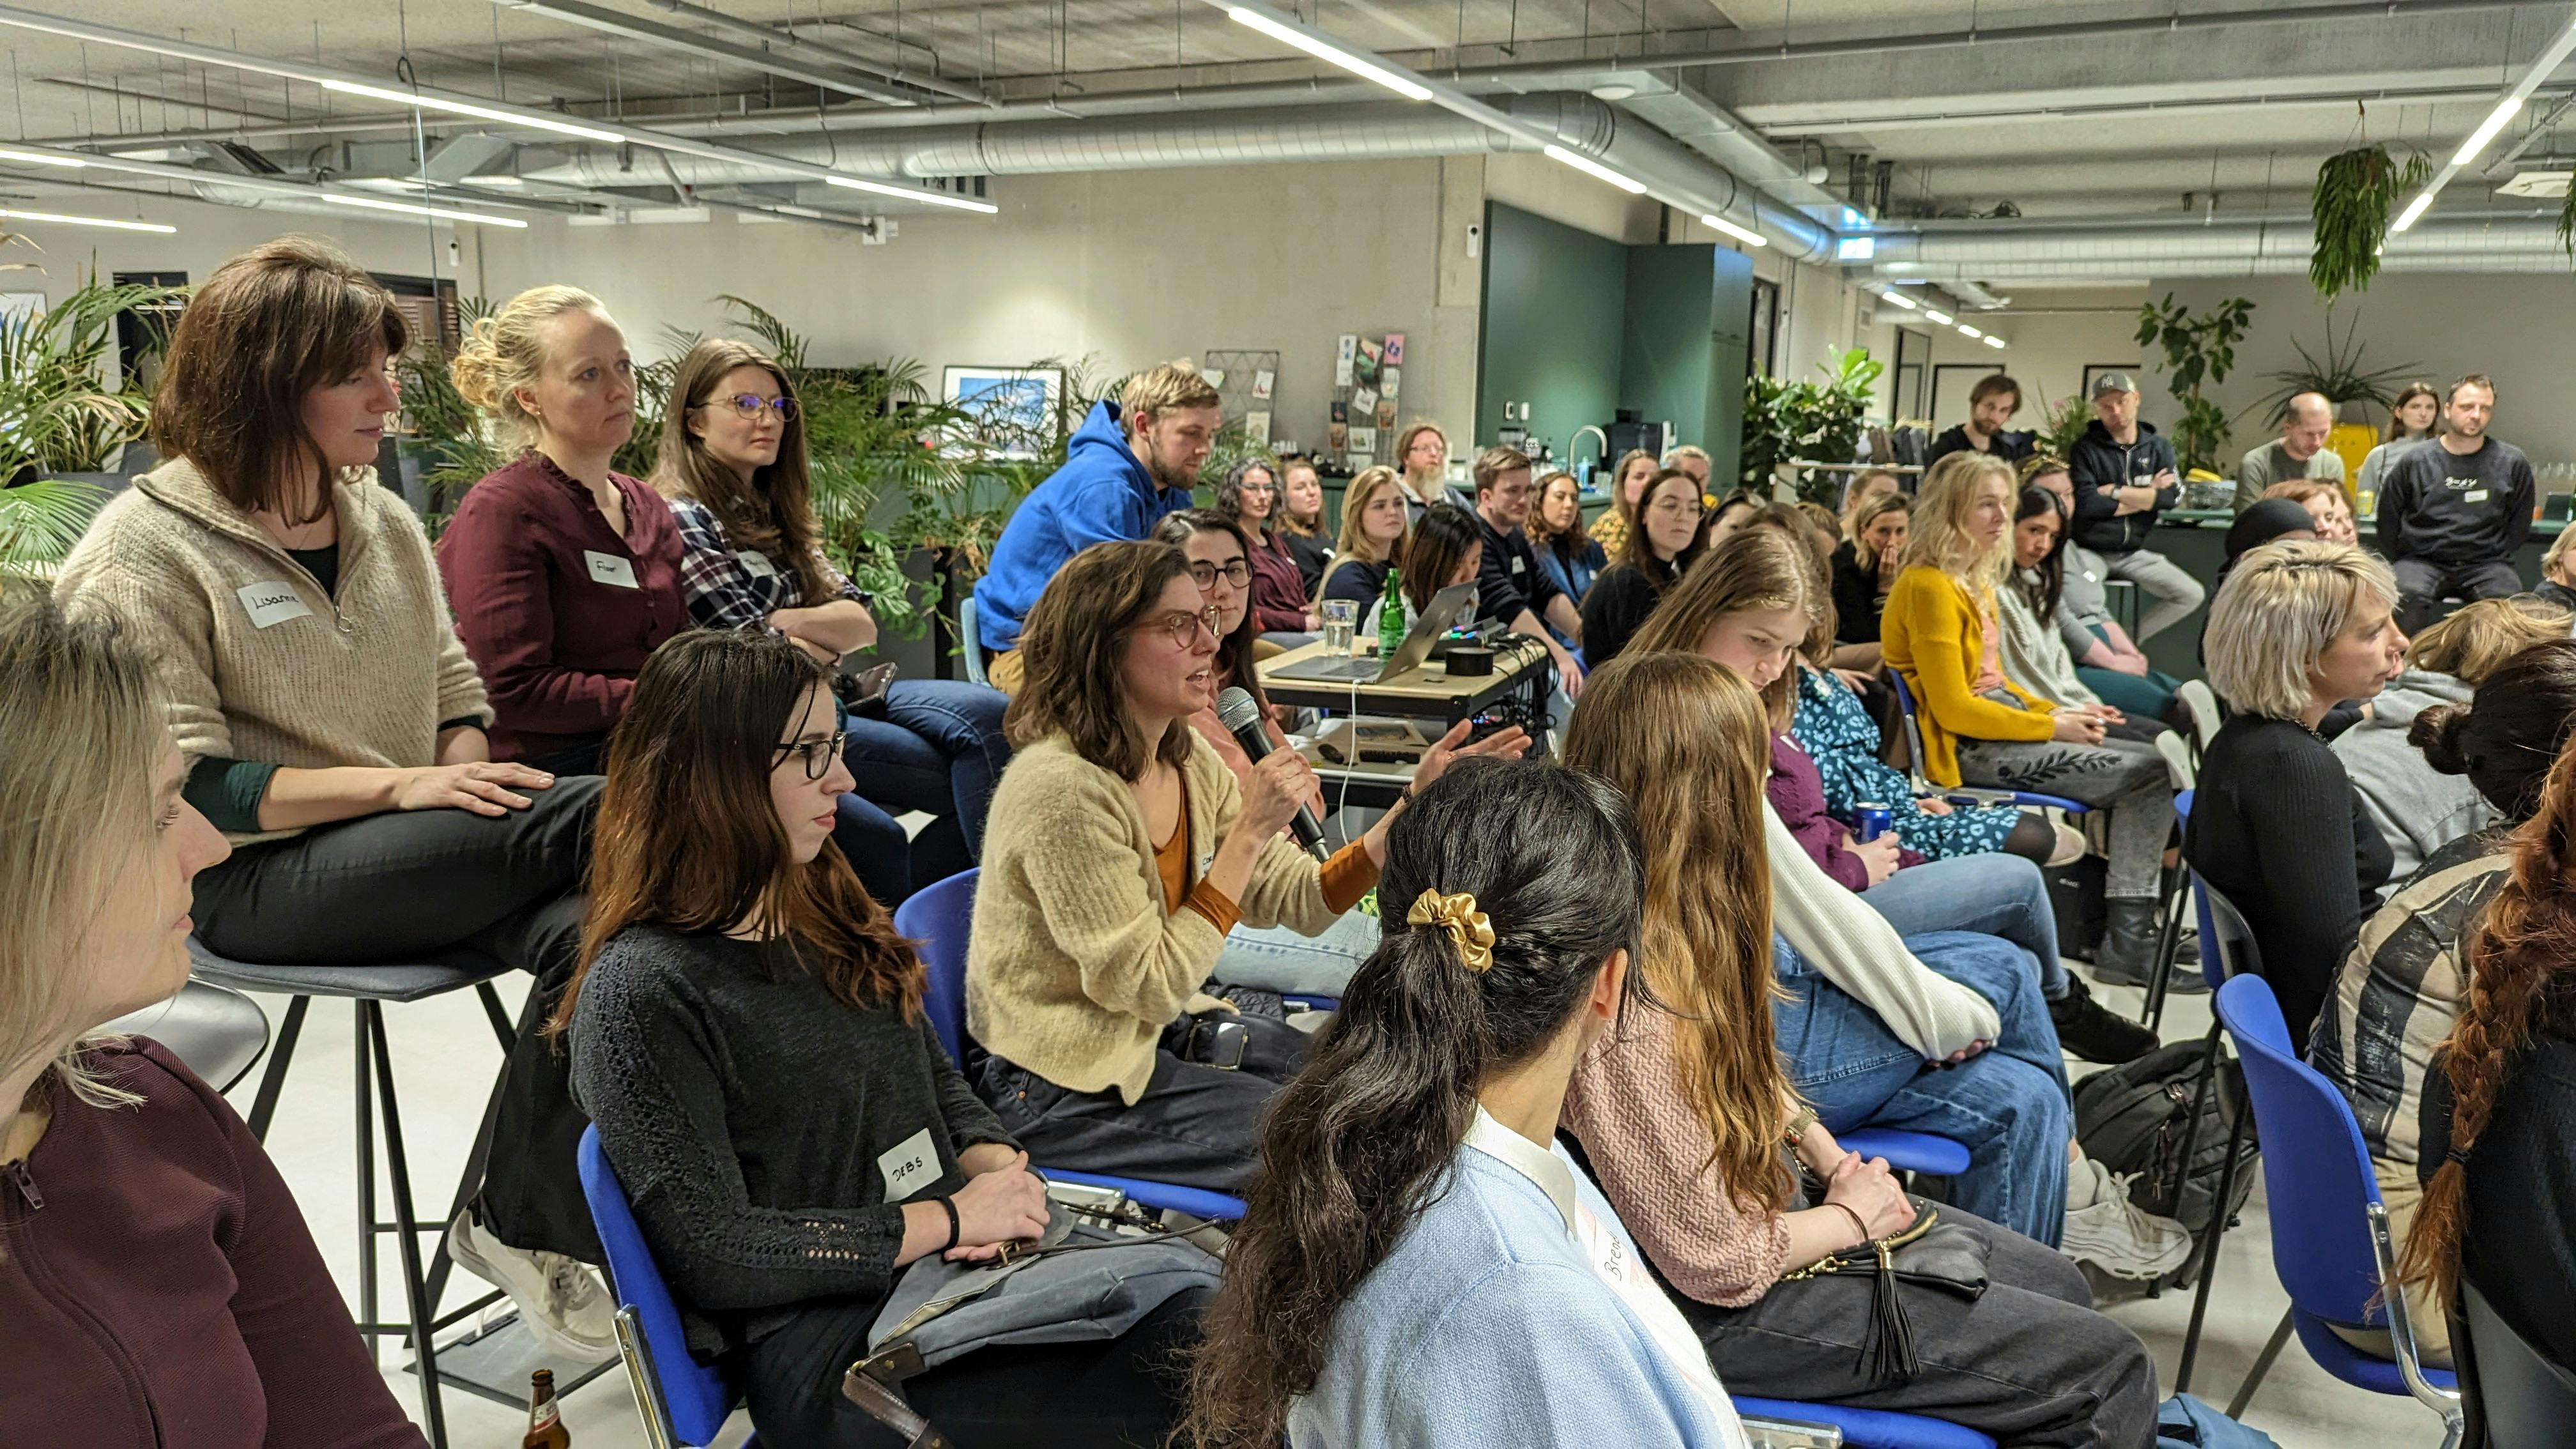 View of the audience at the Girl Code meetup hosted in 2023. An attendee sitting in the audience is holding a microphone and asking a question to the speaker.